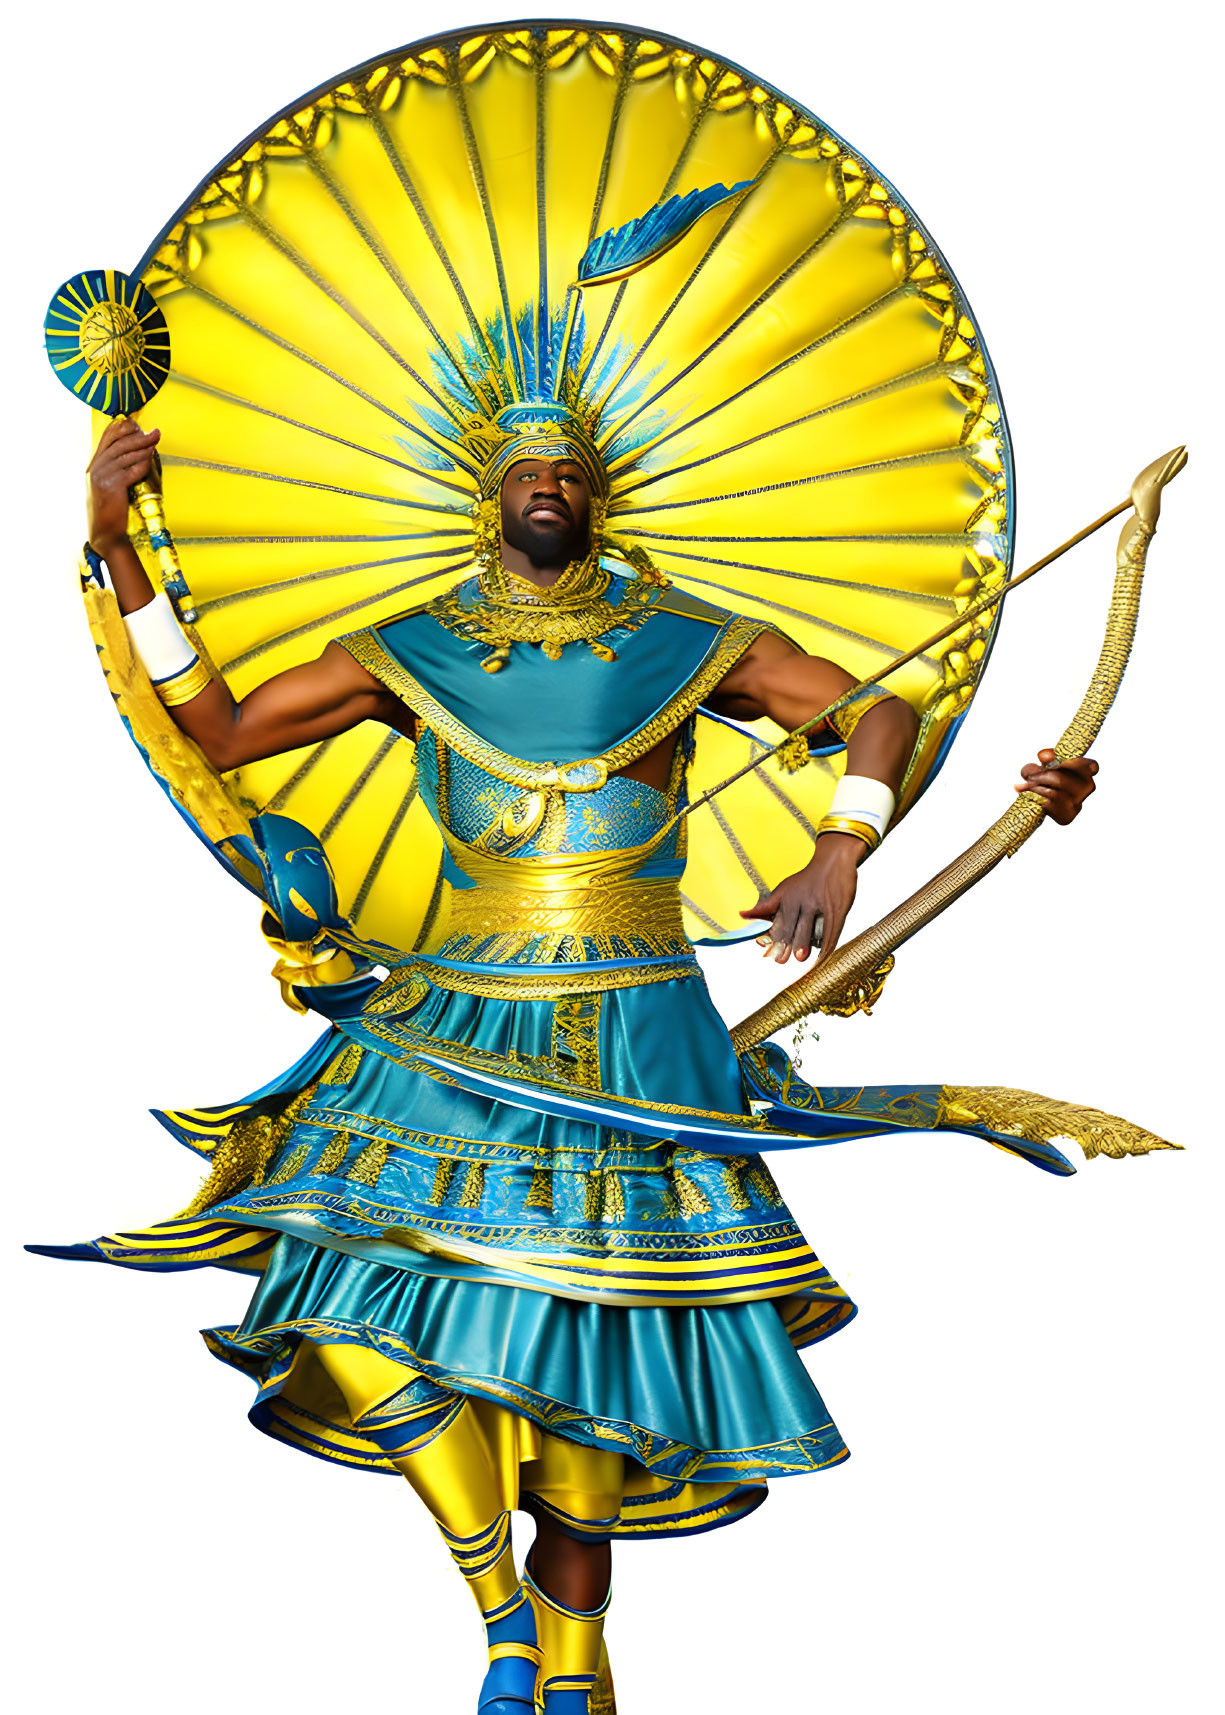 Elaborate Blue and Gold Carnival Costume with Fan Headdress and Bow